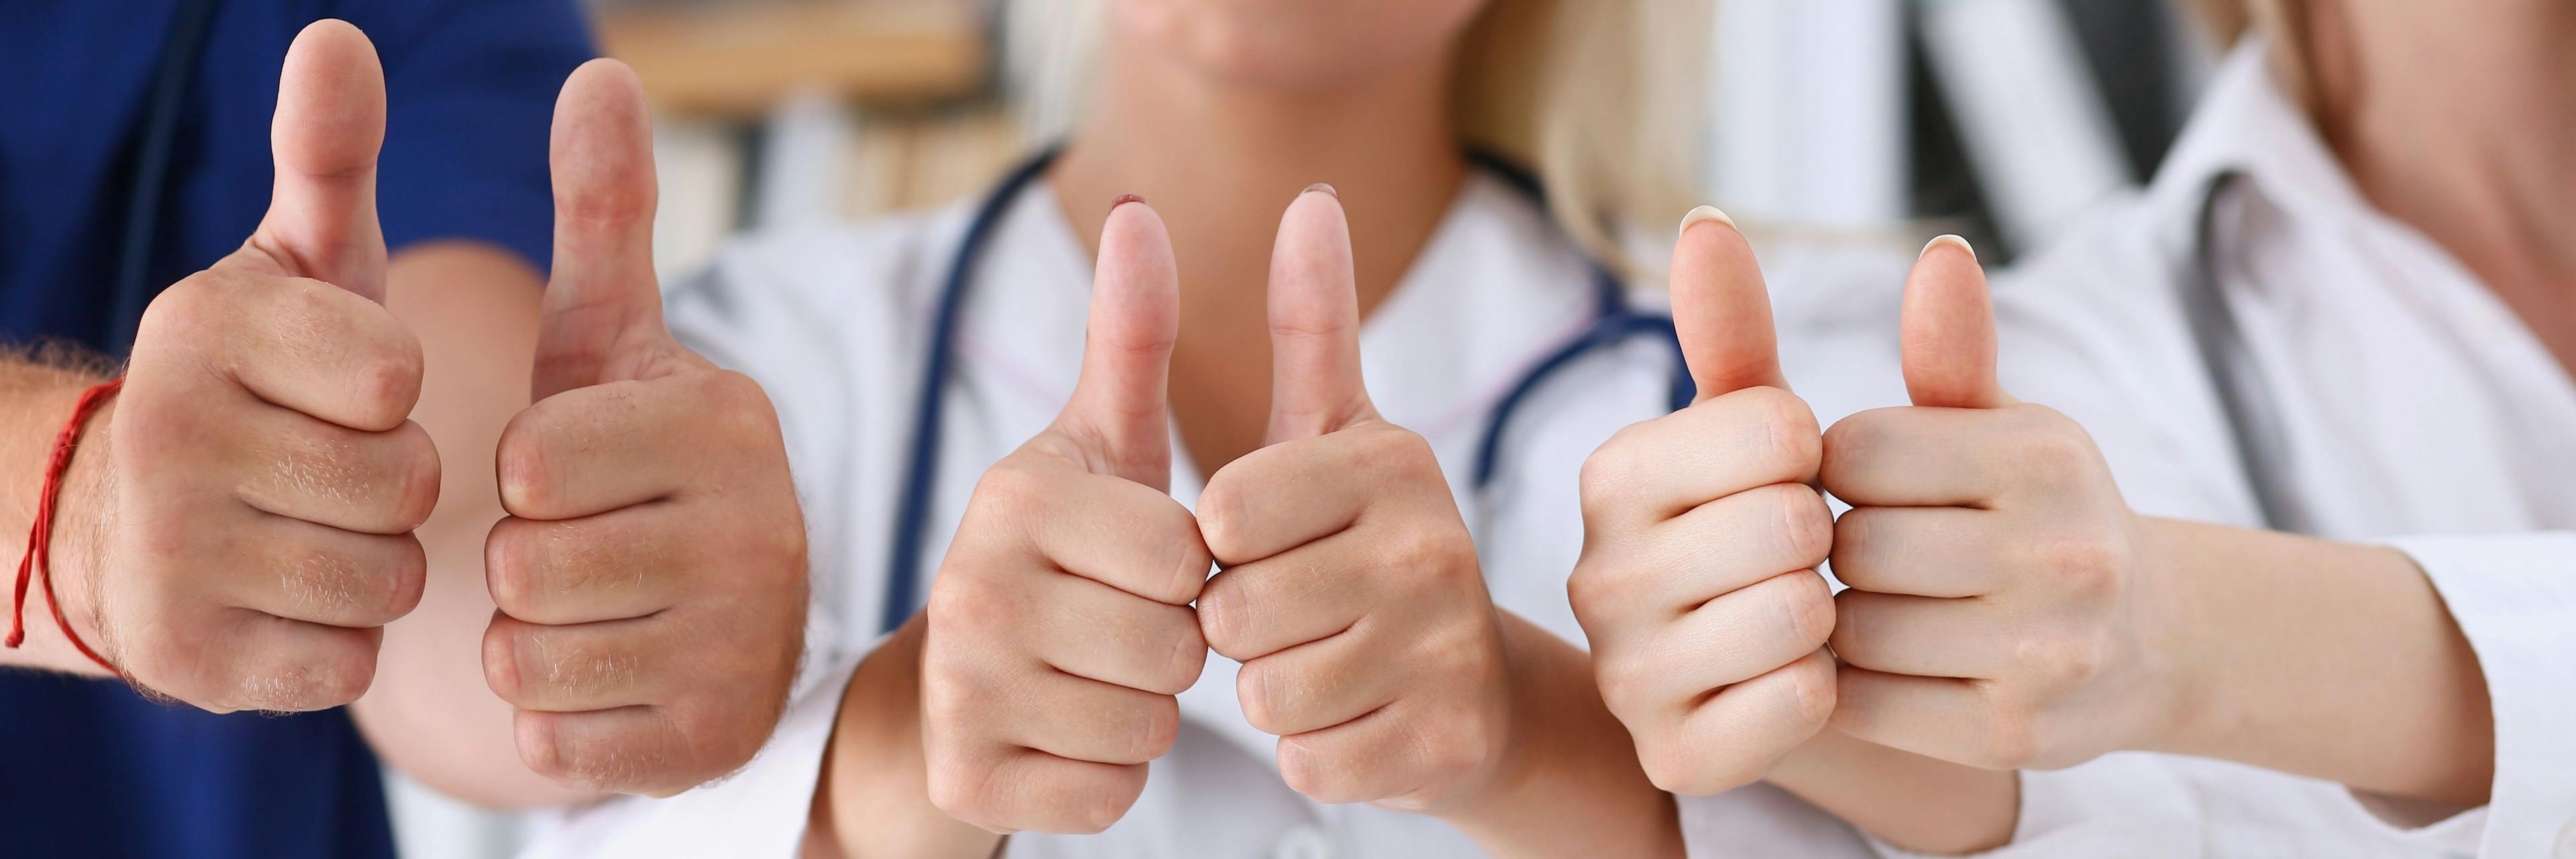 Doctors give thumbs up